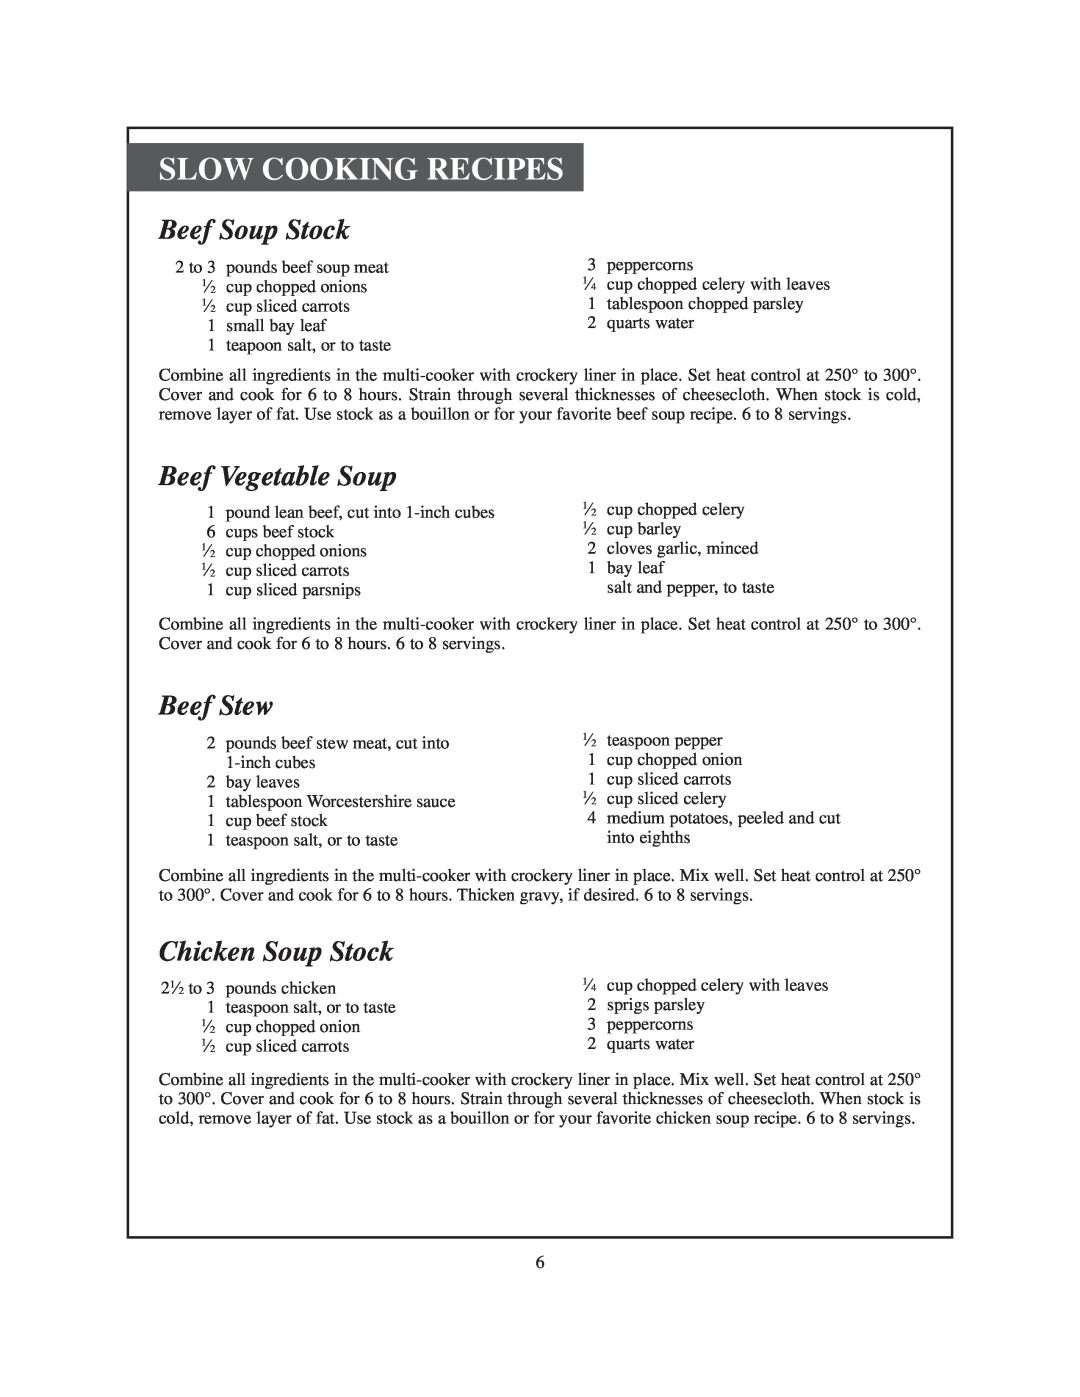 Presto Electric multi-cooker Slow Cooking Recipes, Beef Soup Stock, Beef Vegetable Soup, Beef Stew, Chicken Soup Stock 